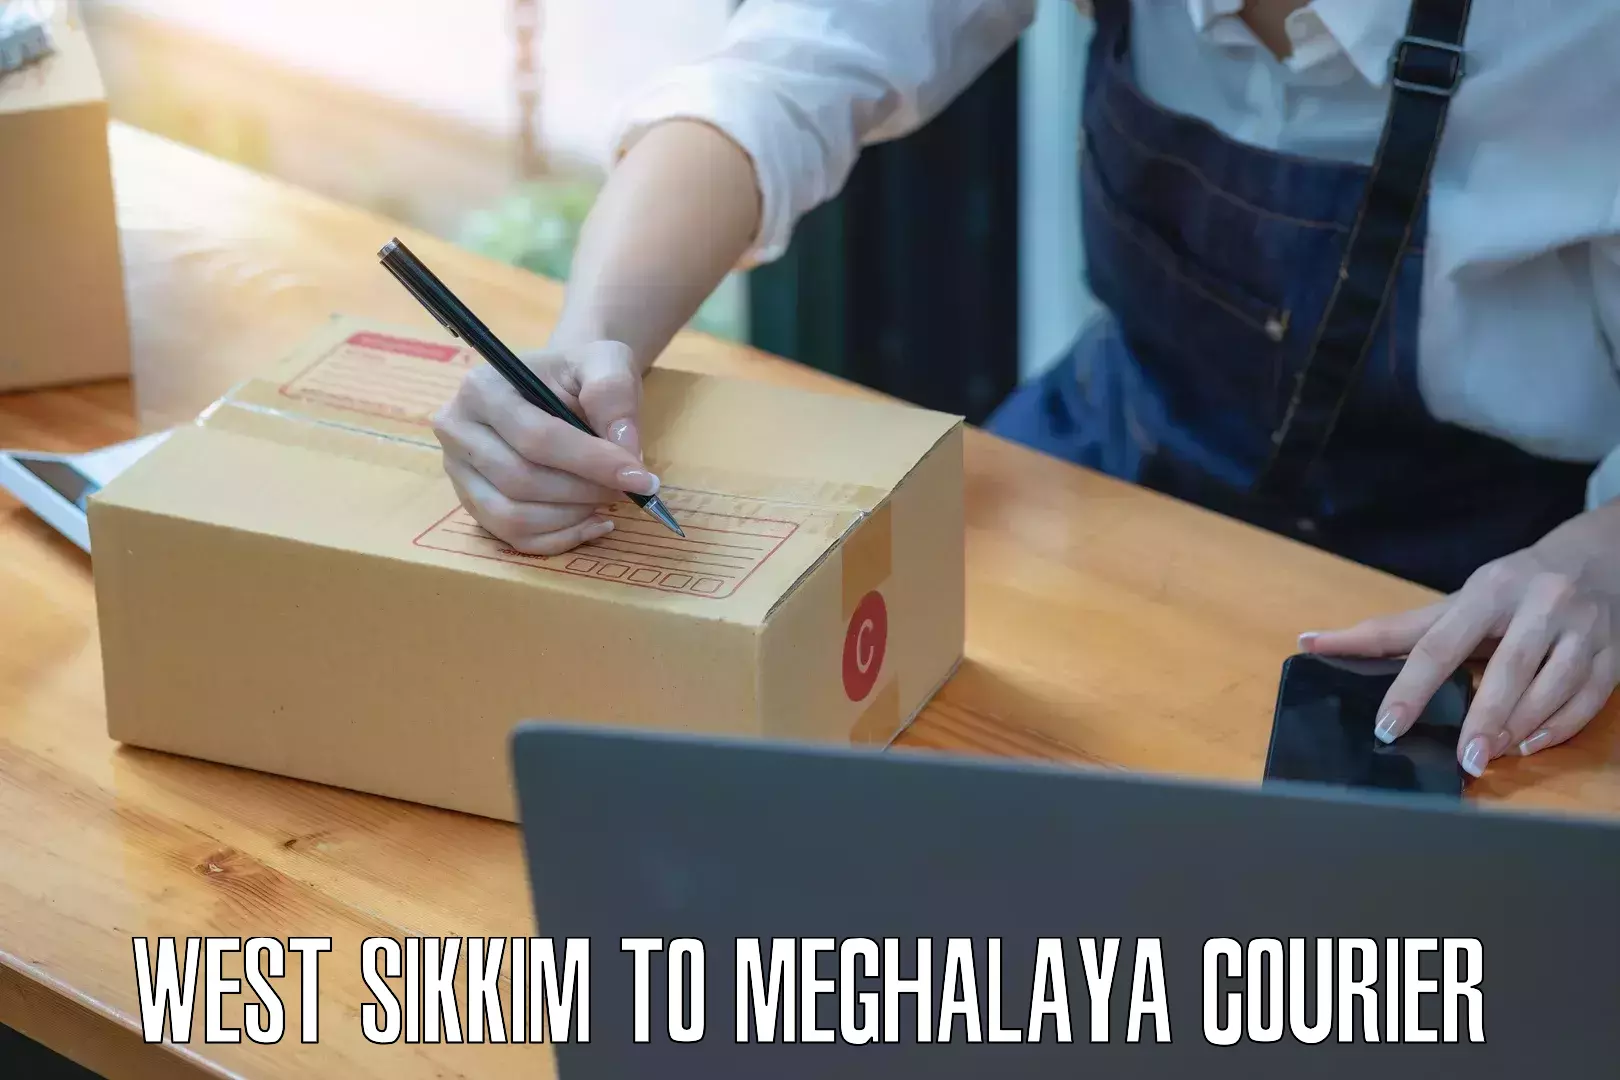 Advanced shipping network in West Sikkim to Meghalaya